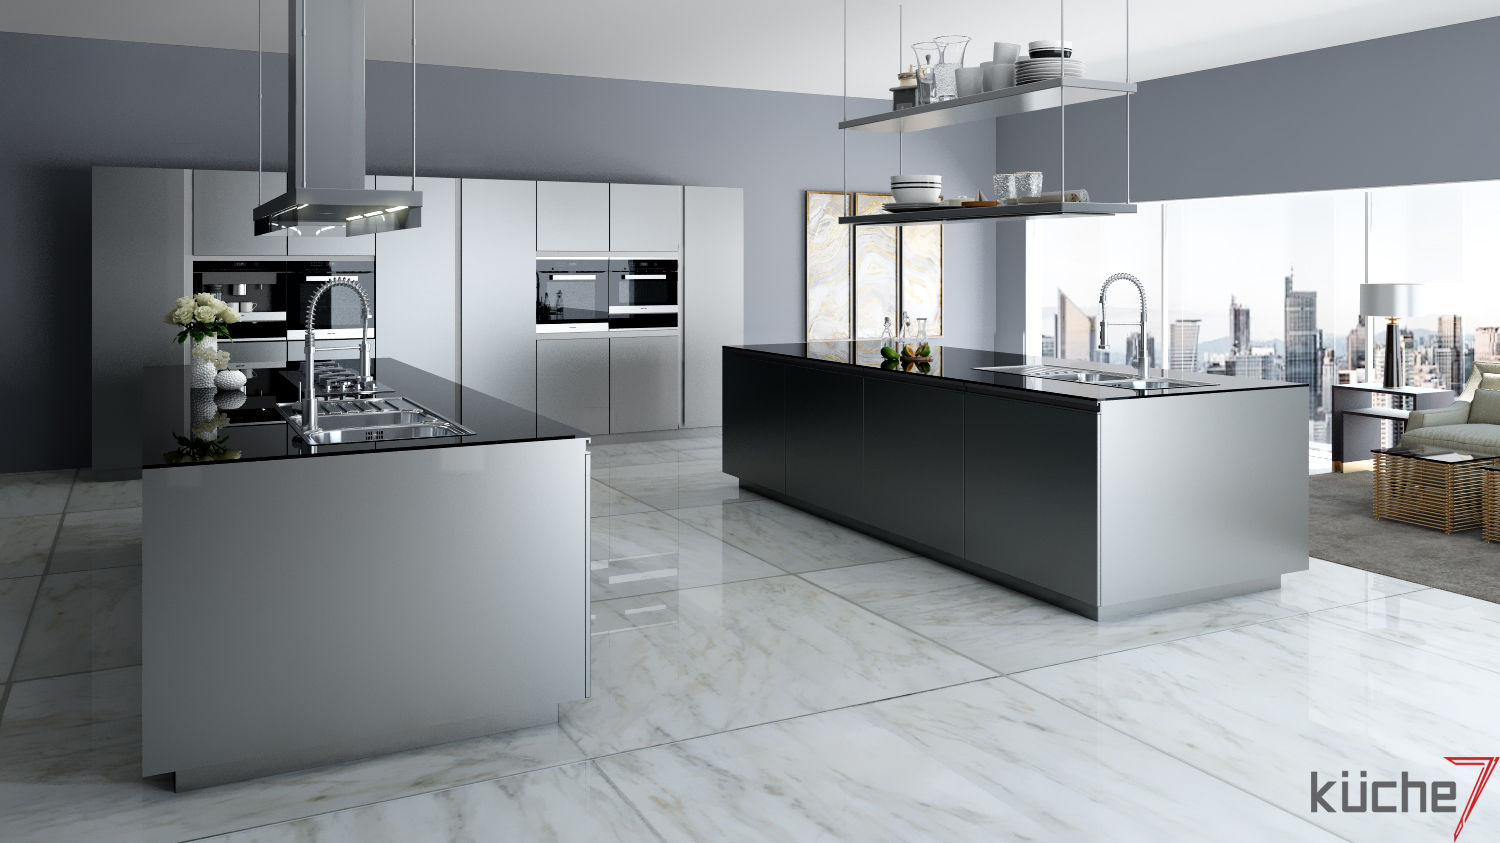 Luxury kitchens that outclasses all other kitchens you've seen, Küche7 Küche7 مطبخ حديد